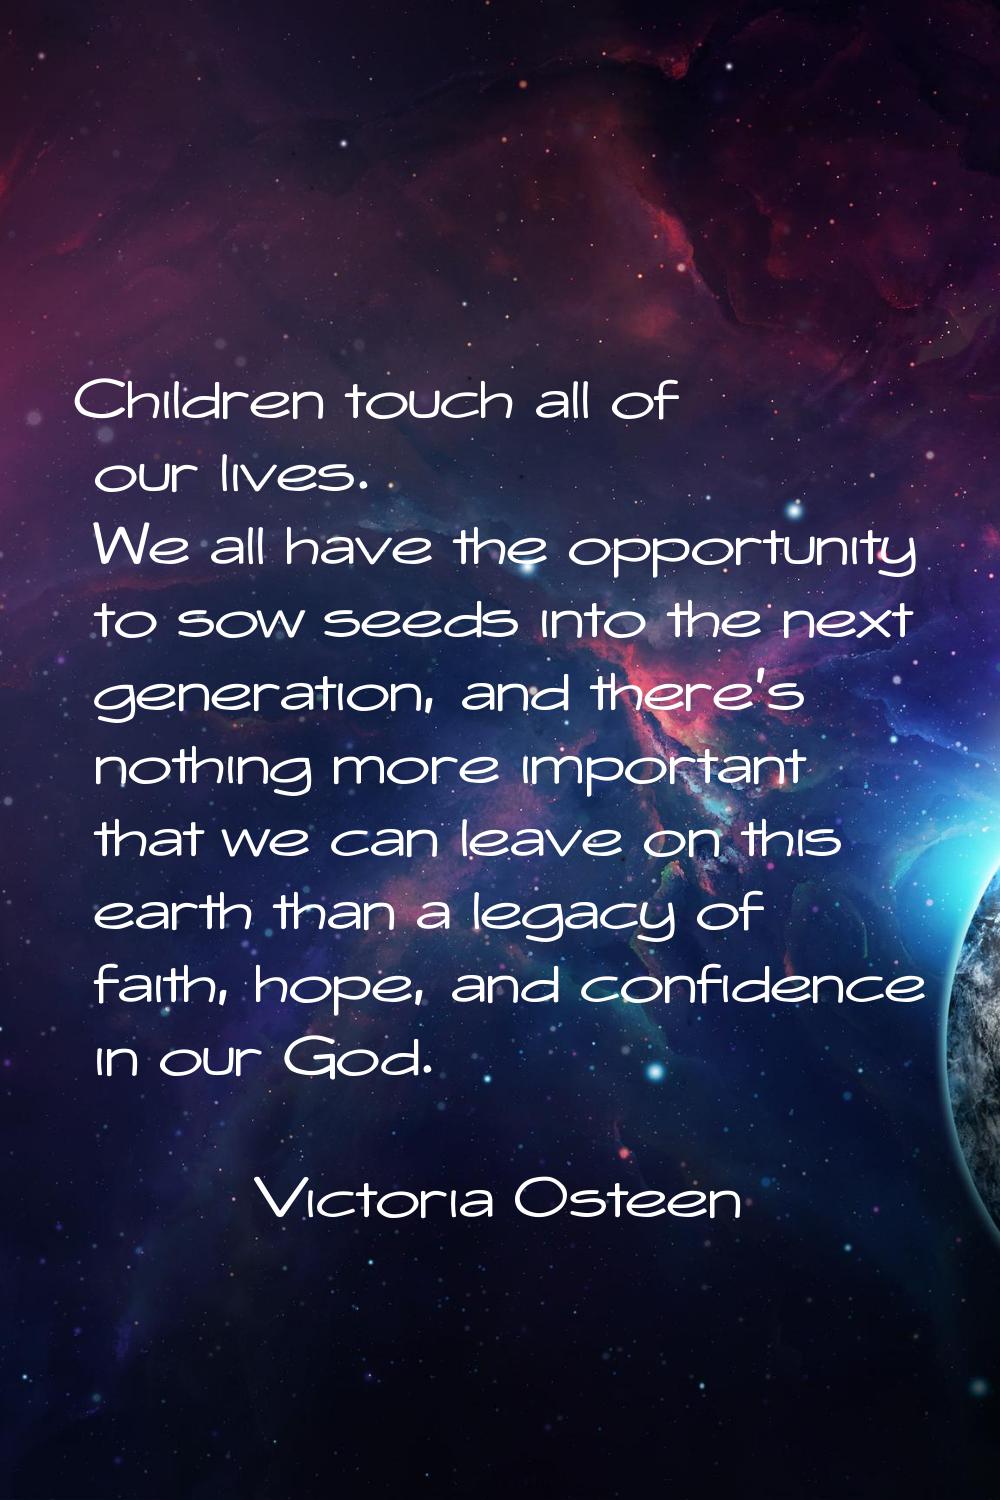 Children touch all of our lives. We all have the opportunity to sow seeds into the next generation,